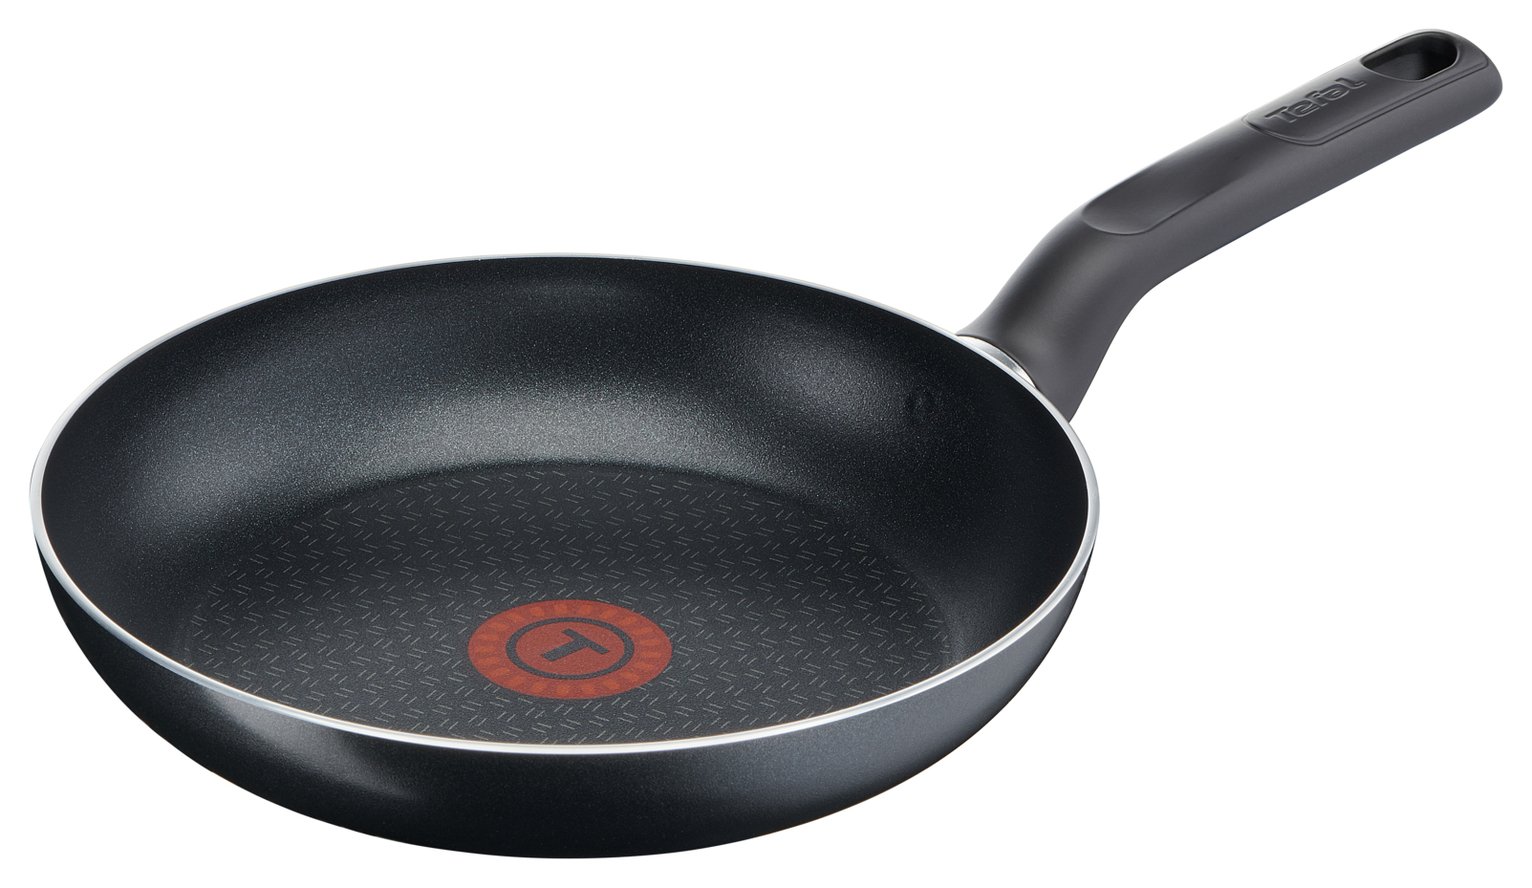 Tefal Superior Cook 20cm Non Stick Frying Pan